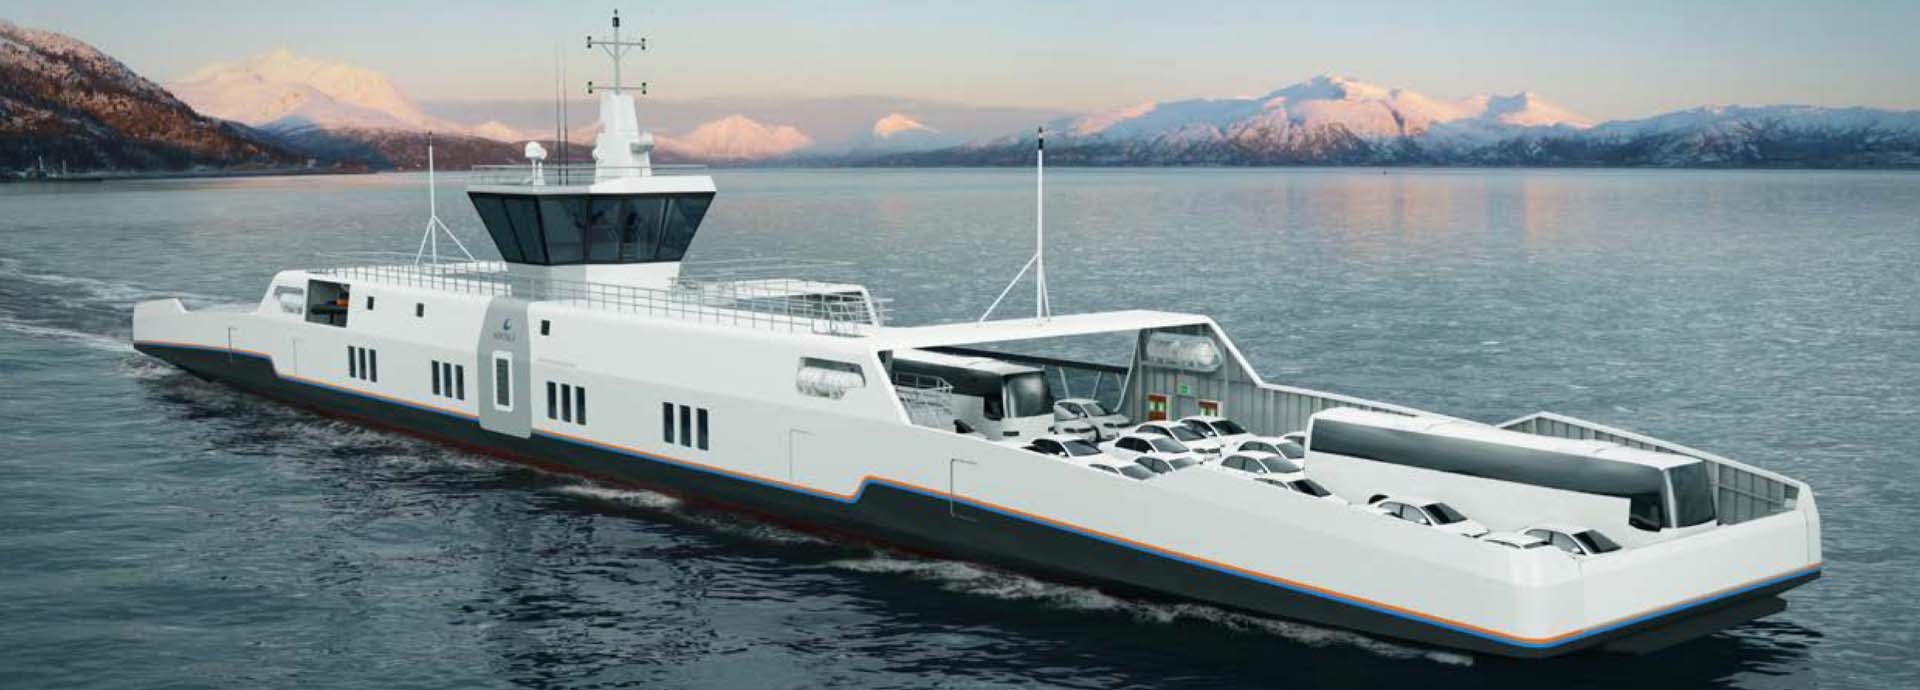 Hybrid propulsion is part of the future for ferries banner